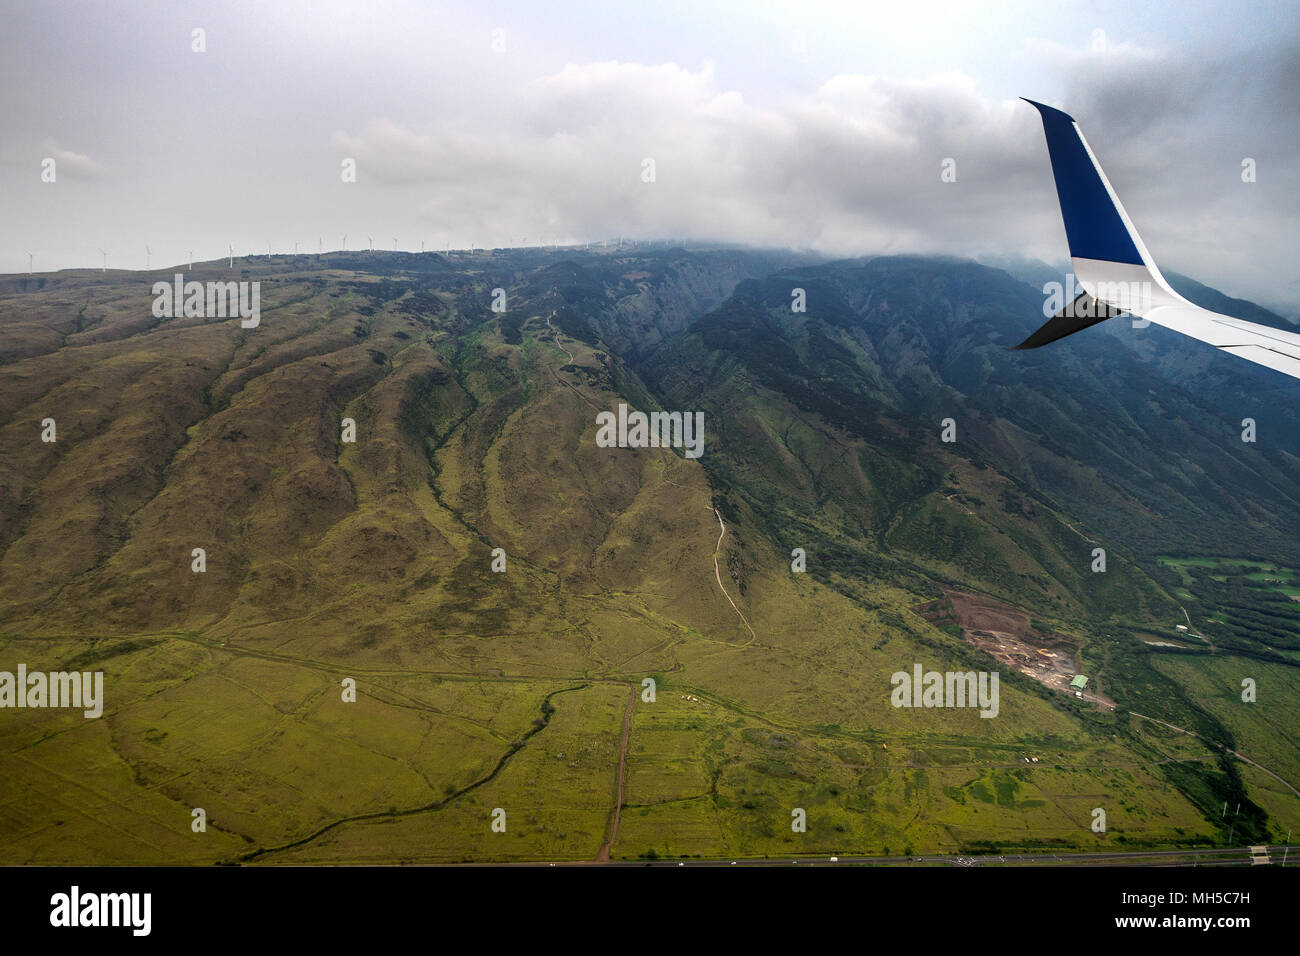 Airplan High Resolution Stock Photography and Images - Alamy